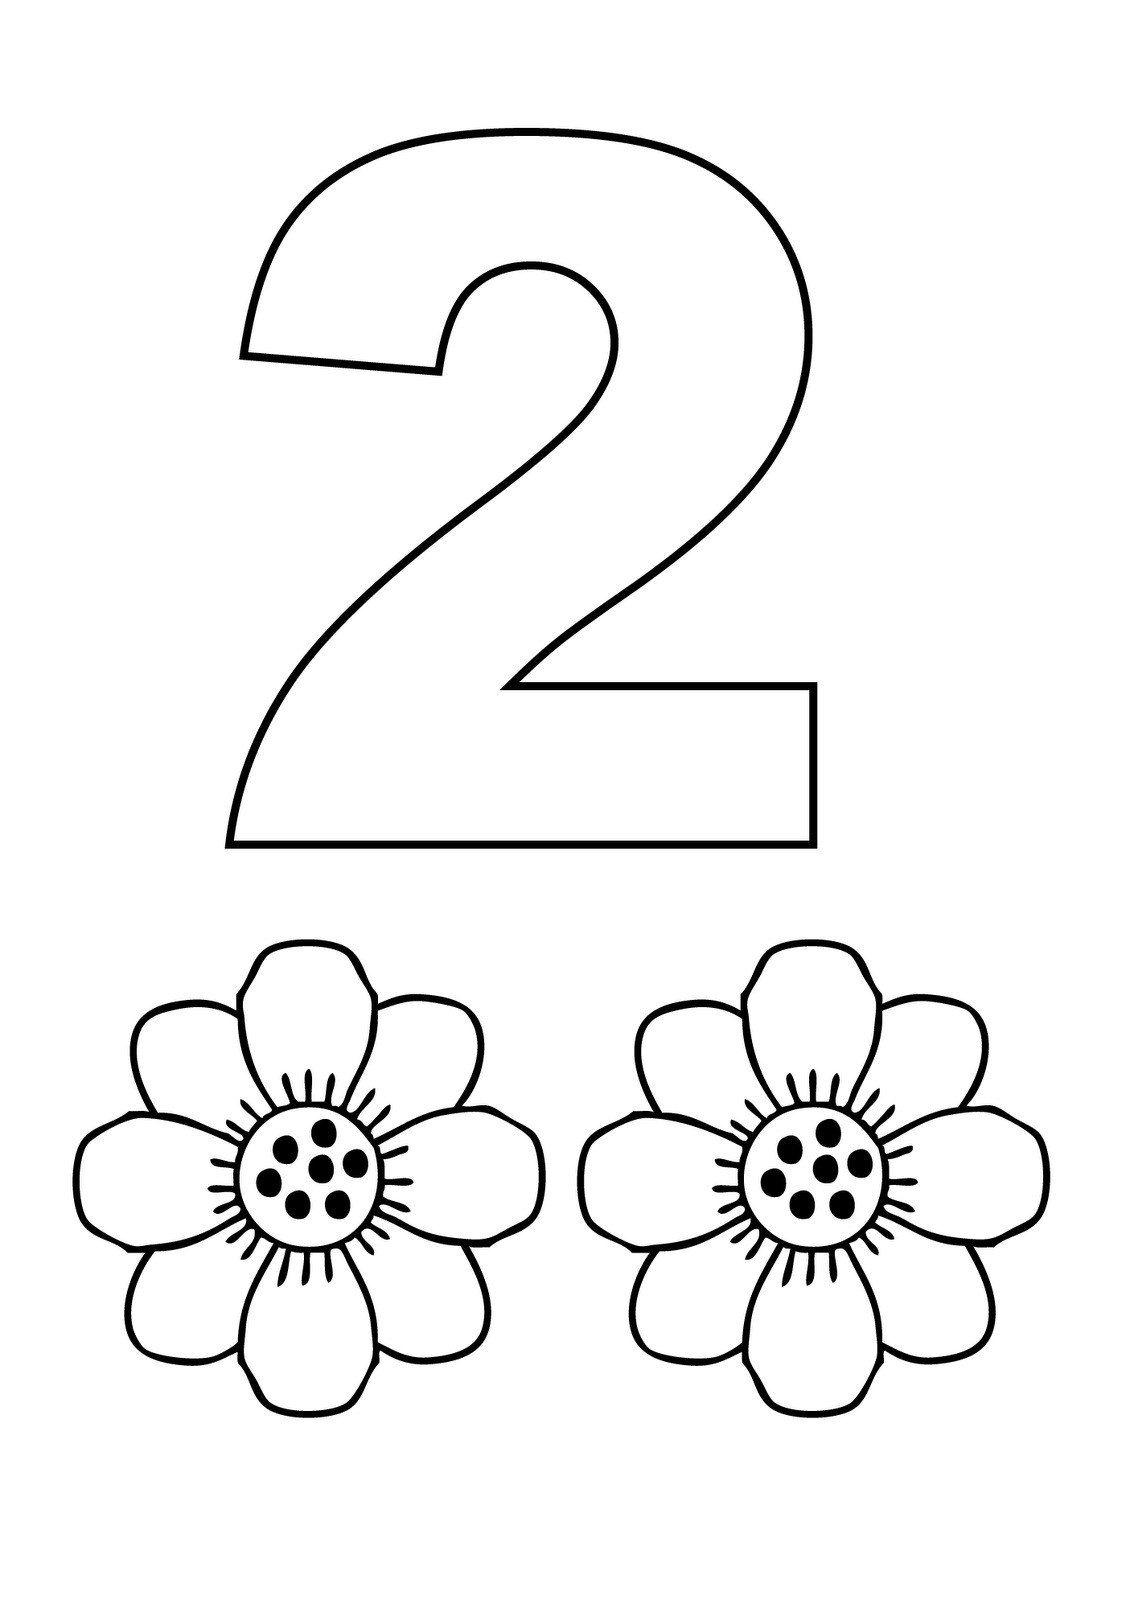 When Do Kids Start Coloring
 Free Printable Number Coloring Pages For Kids